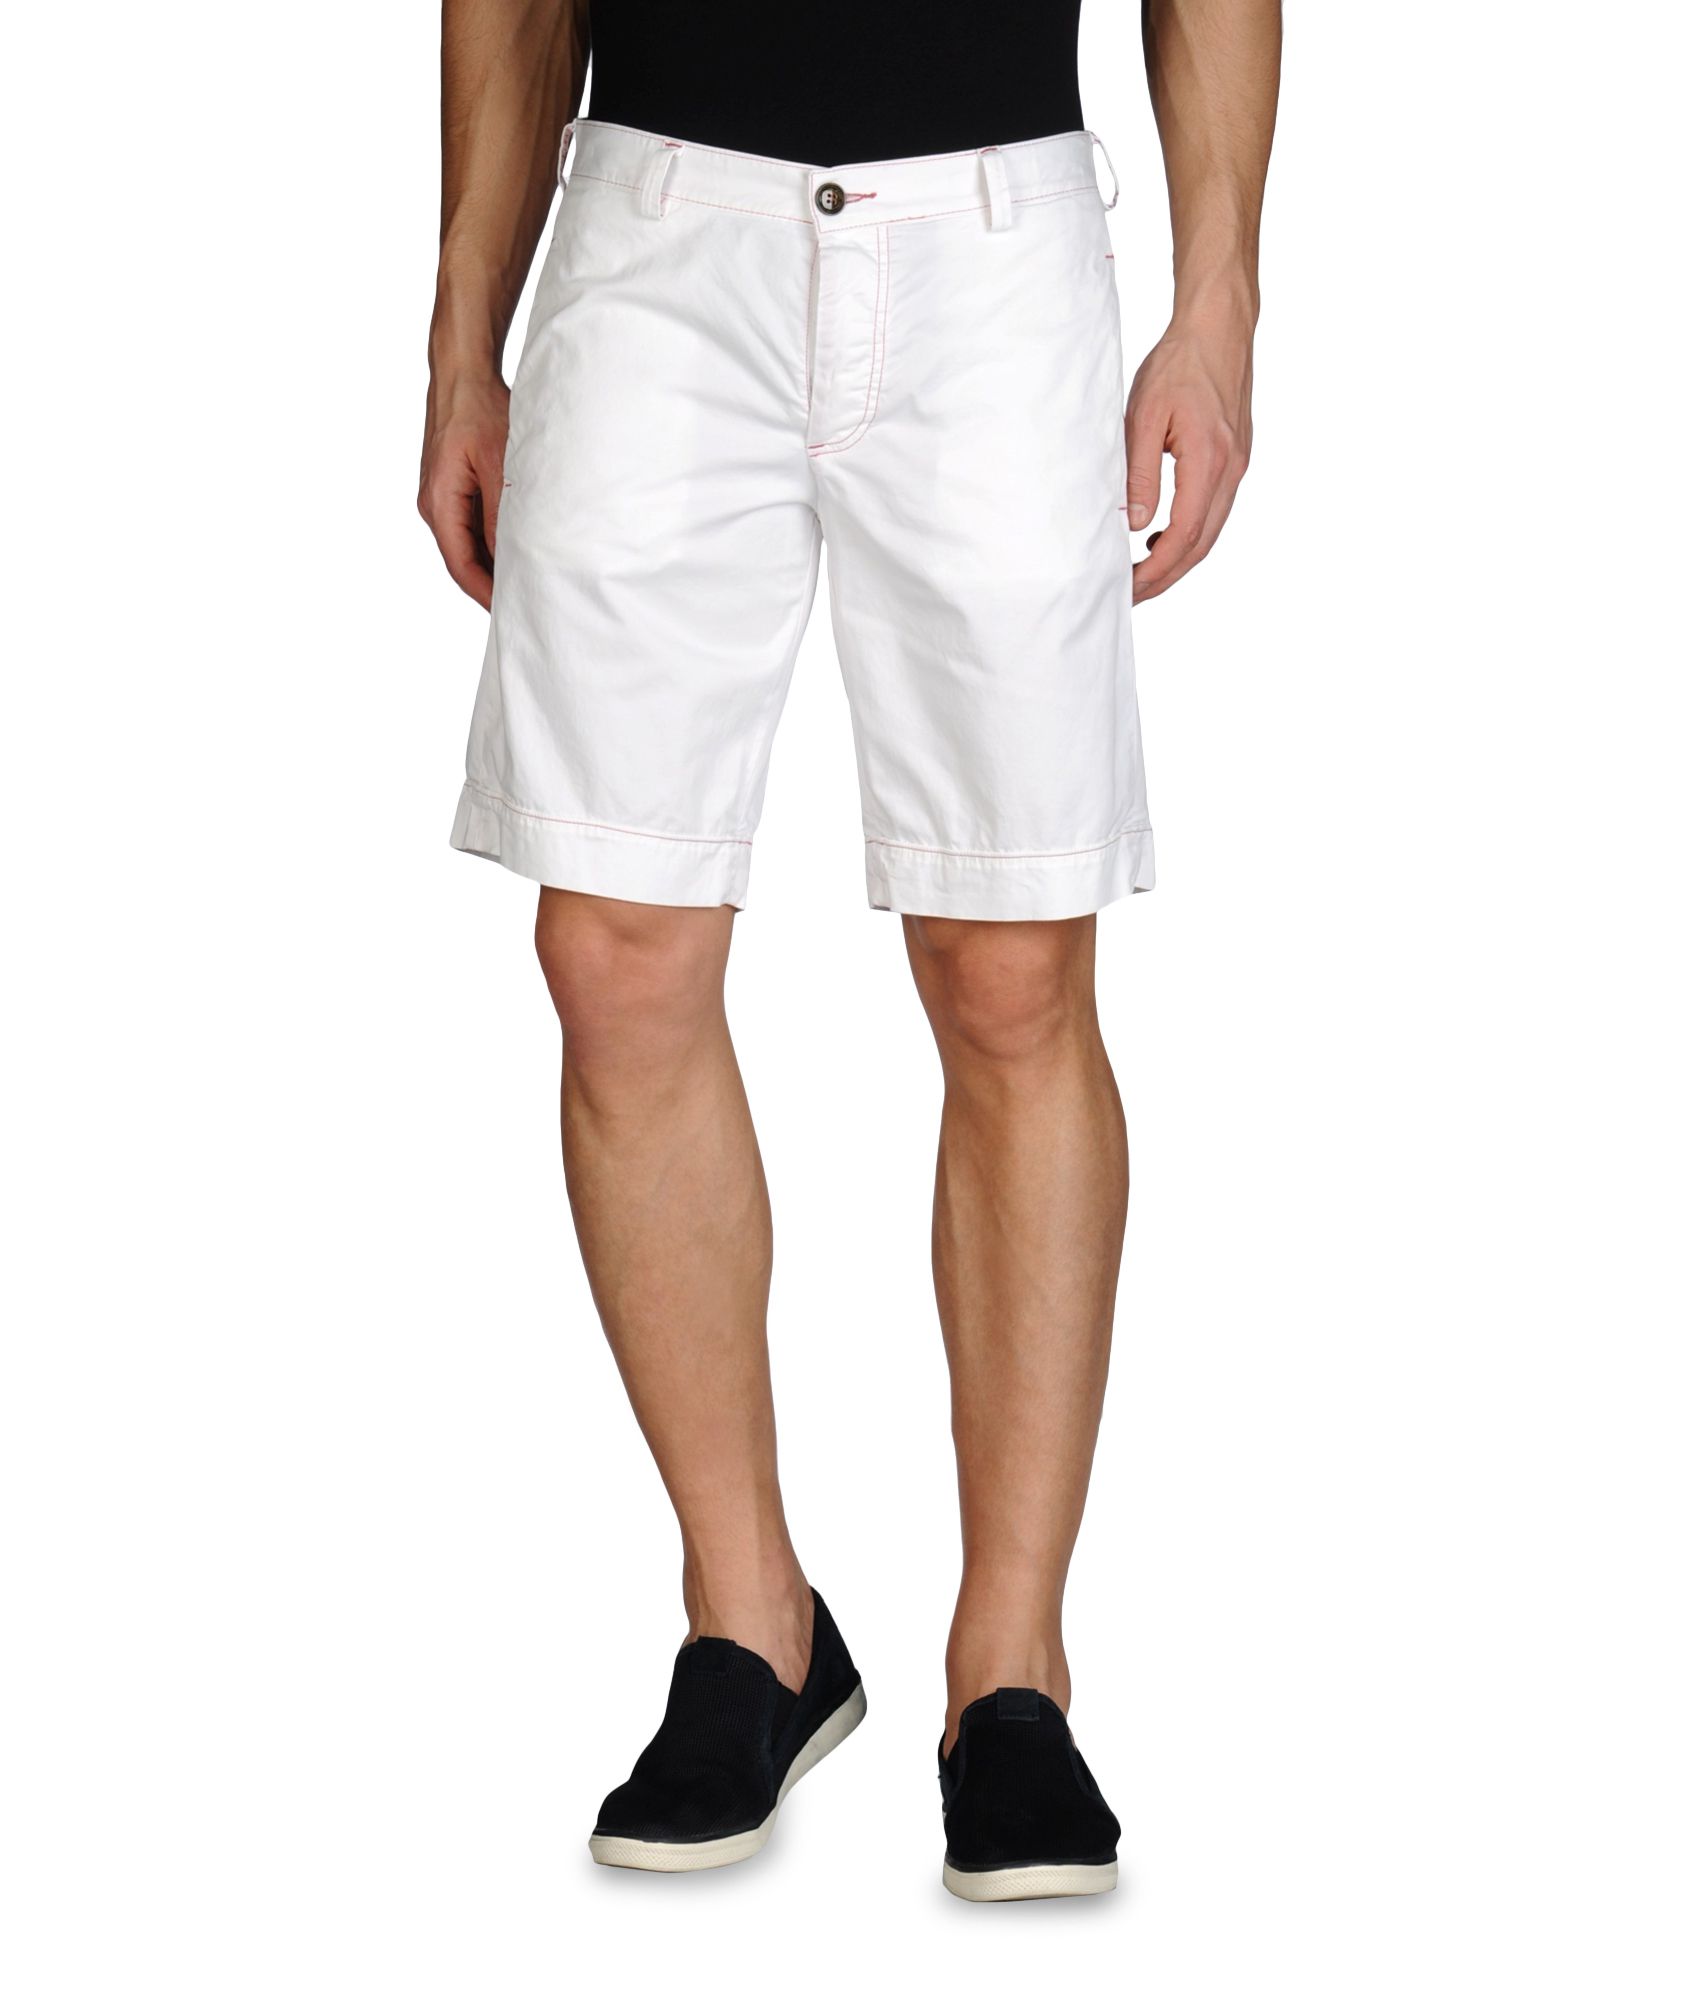 Armani Jeans Bermuda Shorts in Stretch Cotton Sateen in White for Men ...